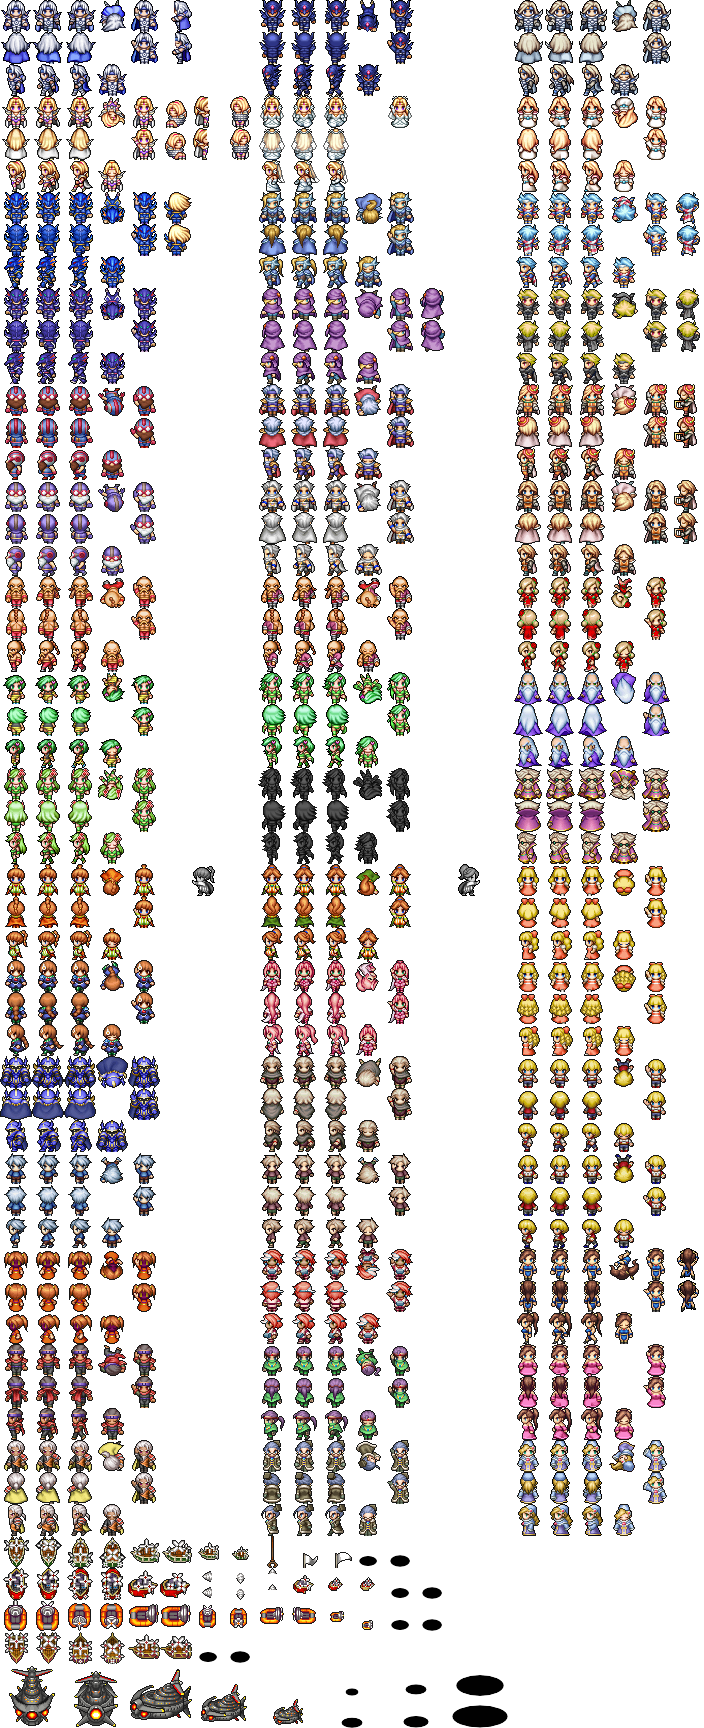 Final Fantasy 4: The Complete Collection - The After Years - Main Characters (Overworld)